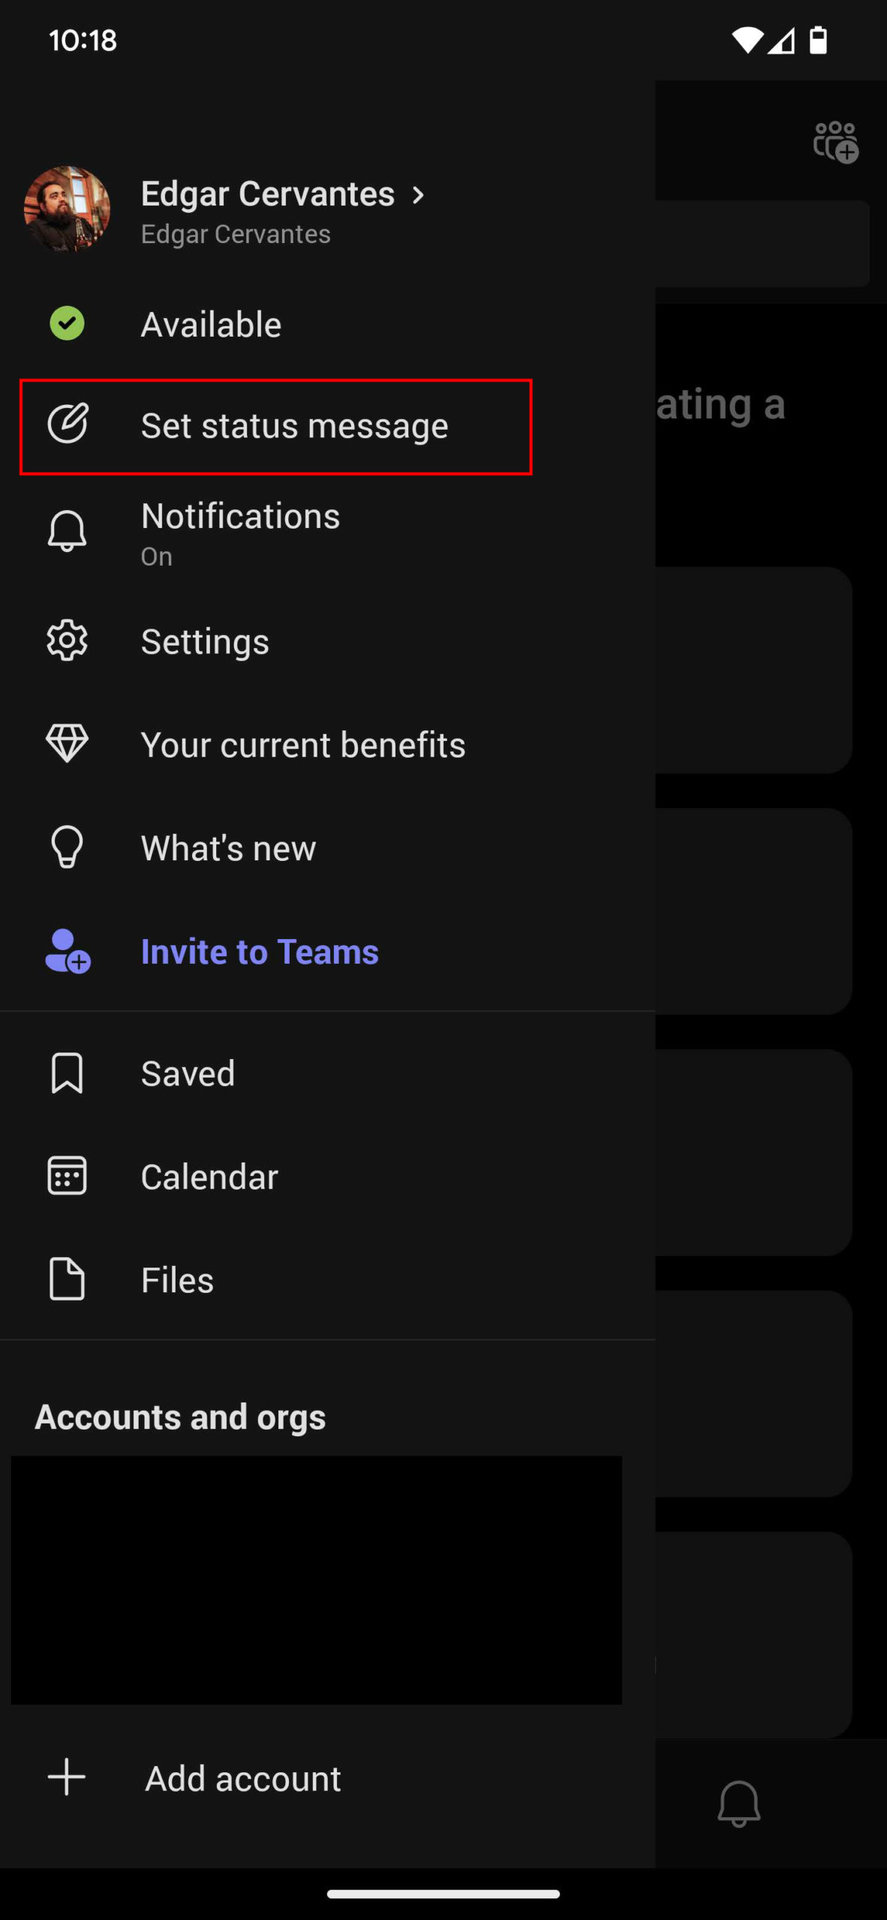 How to set status on Microosft Teams Android app 2